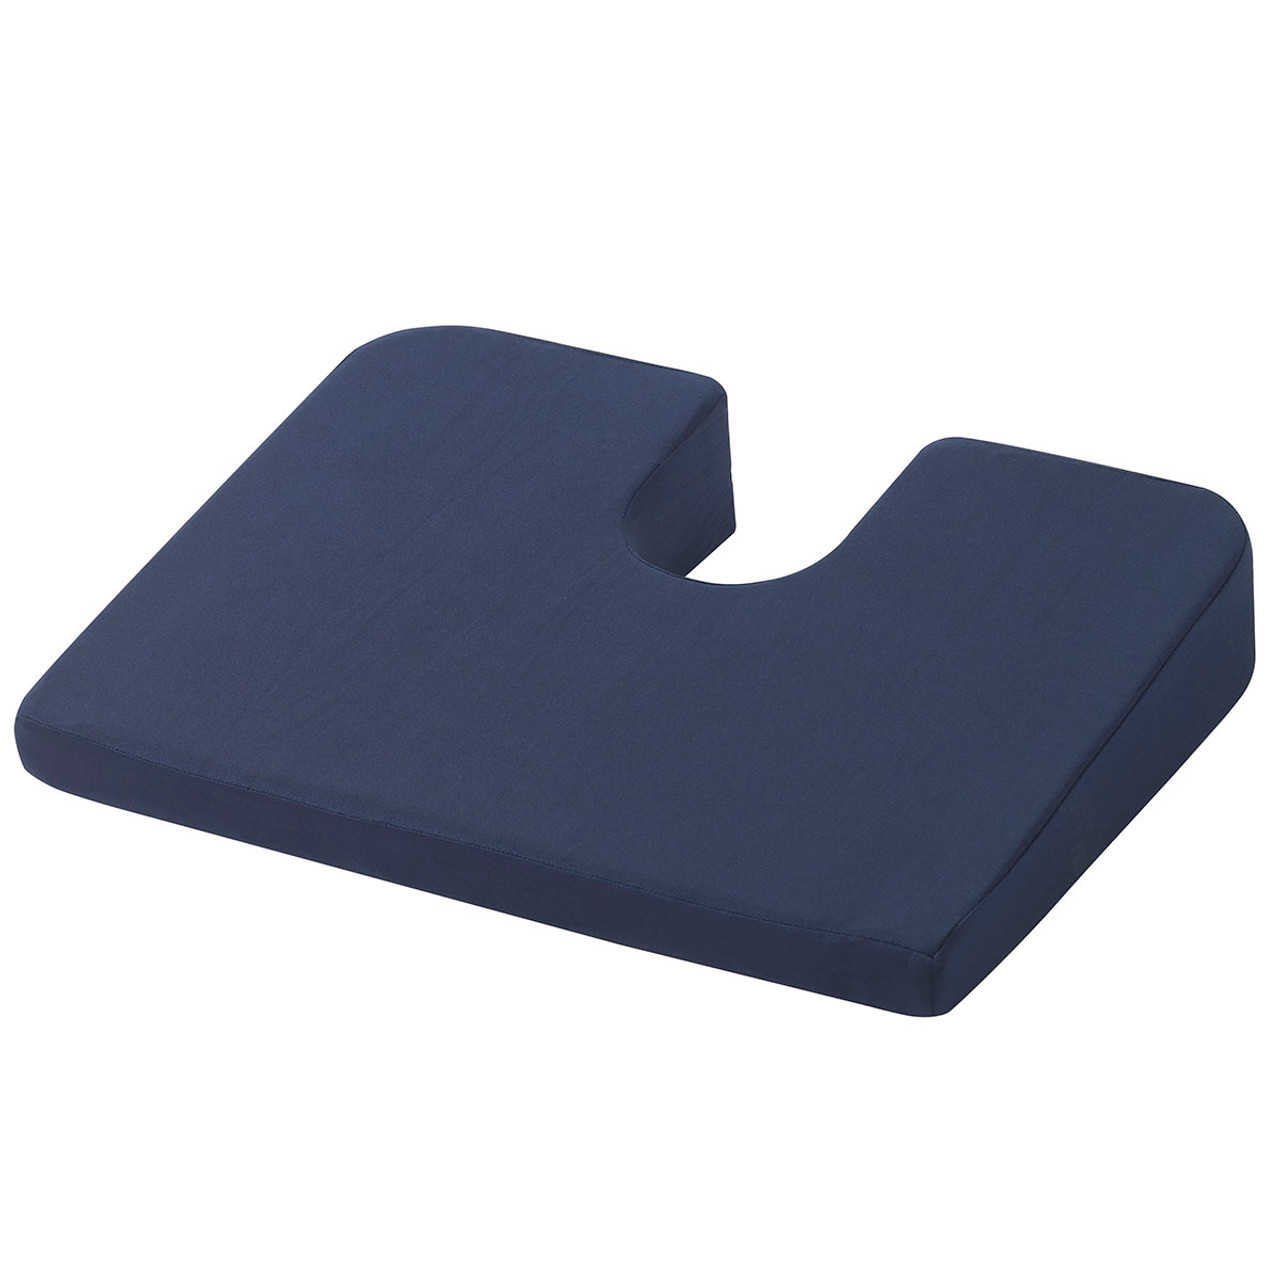 Compressed Coccyx seat Cushion For Sale